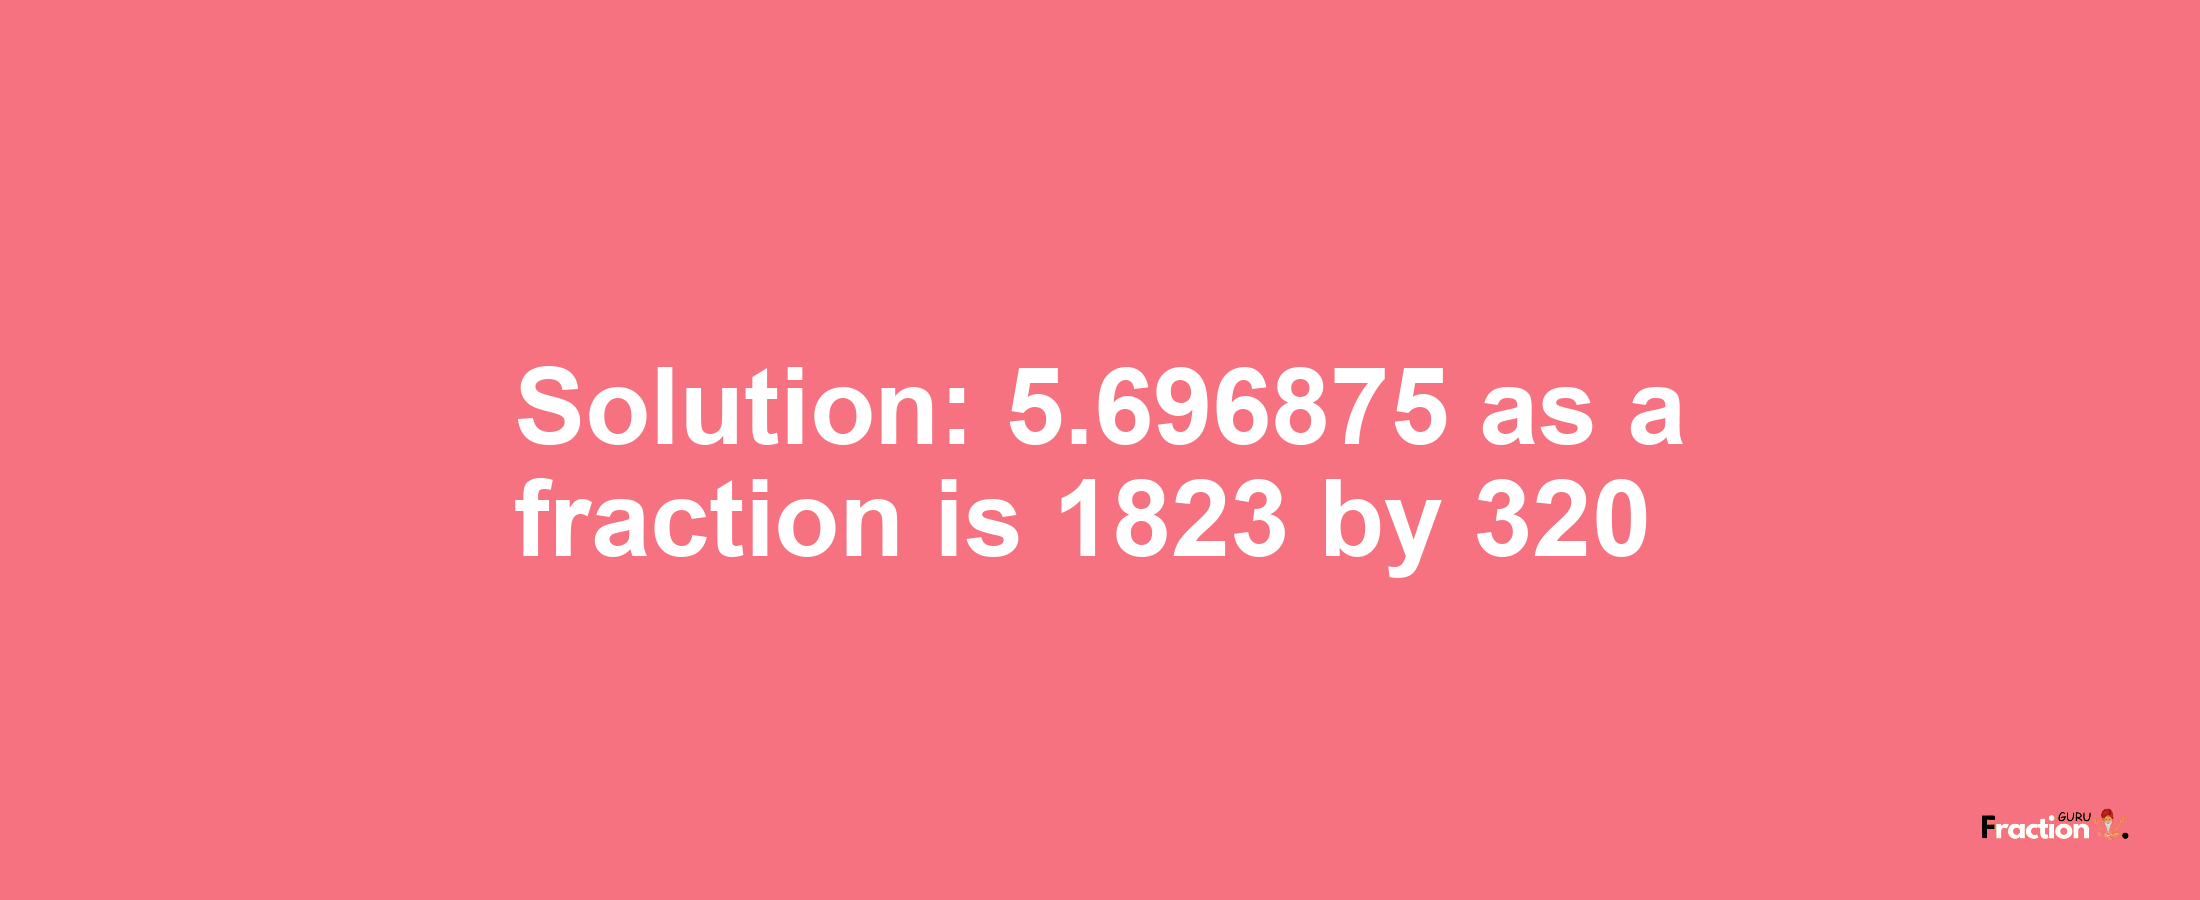 Solution:5.696875 as a fraction is 1823/320